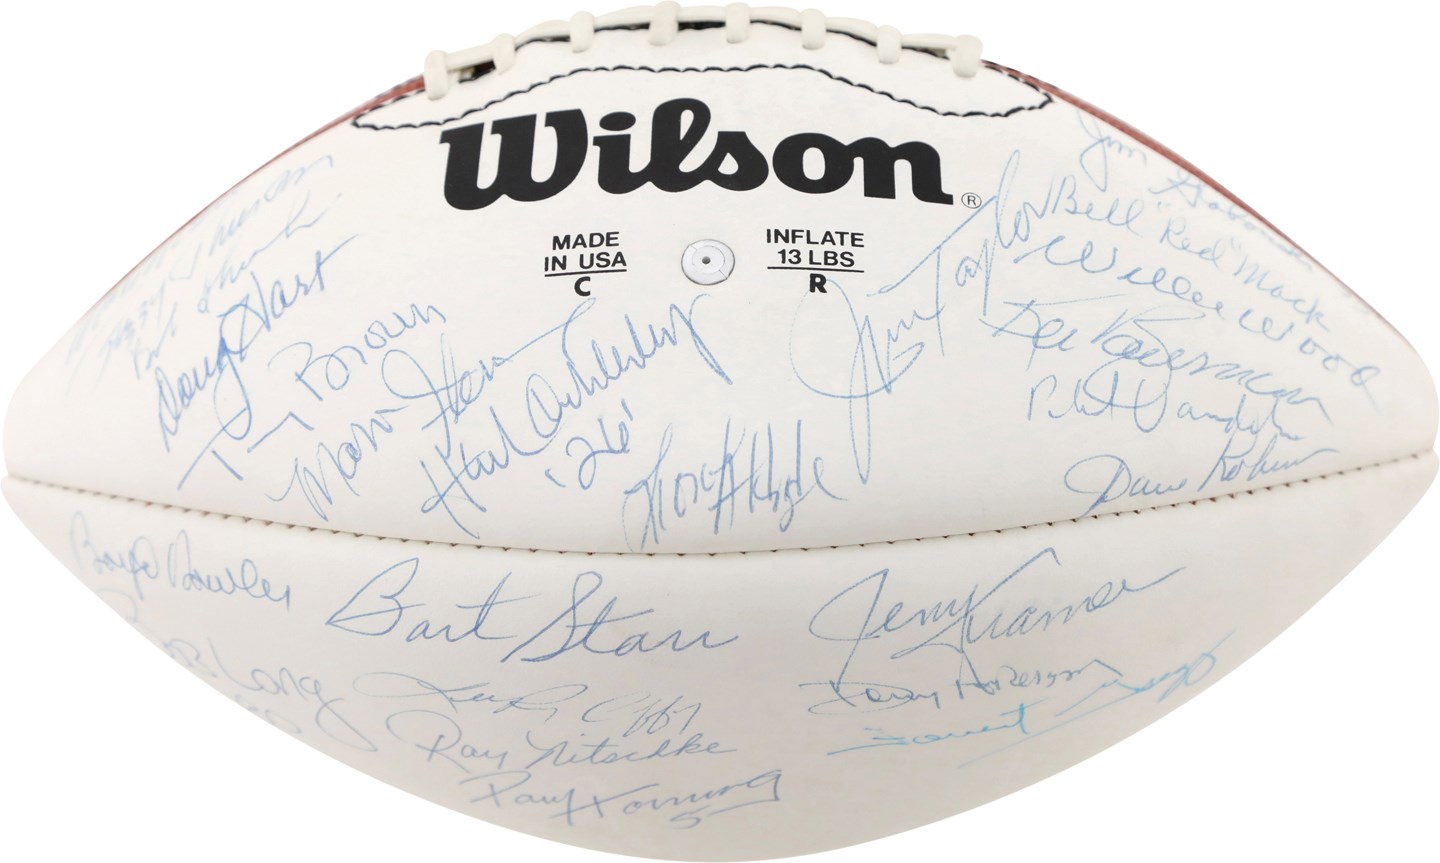 Football - Green Bay Packers Greats Signed Football w/Starr, Hornung, and Nitscke